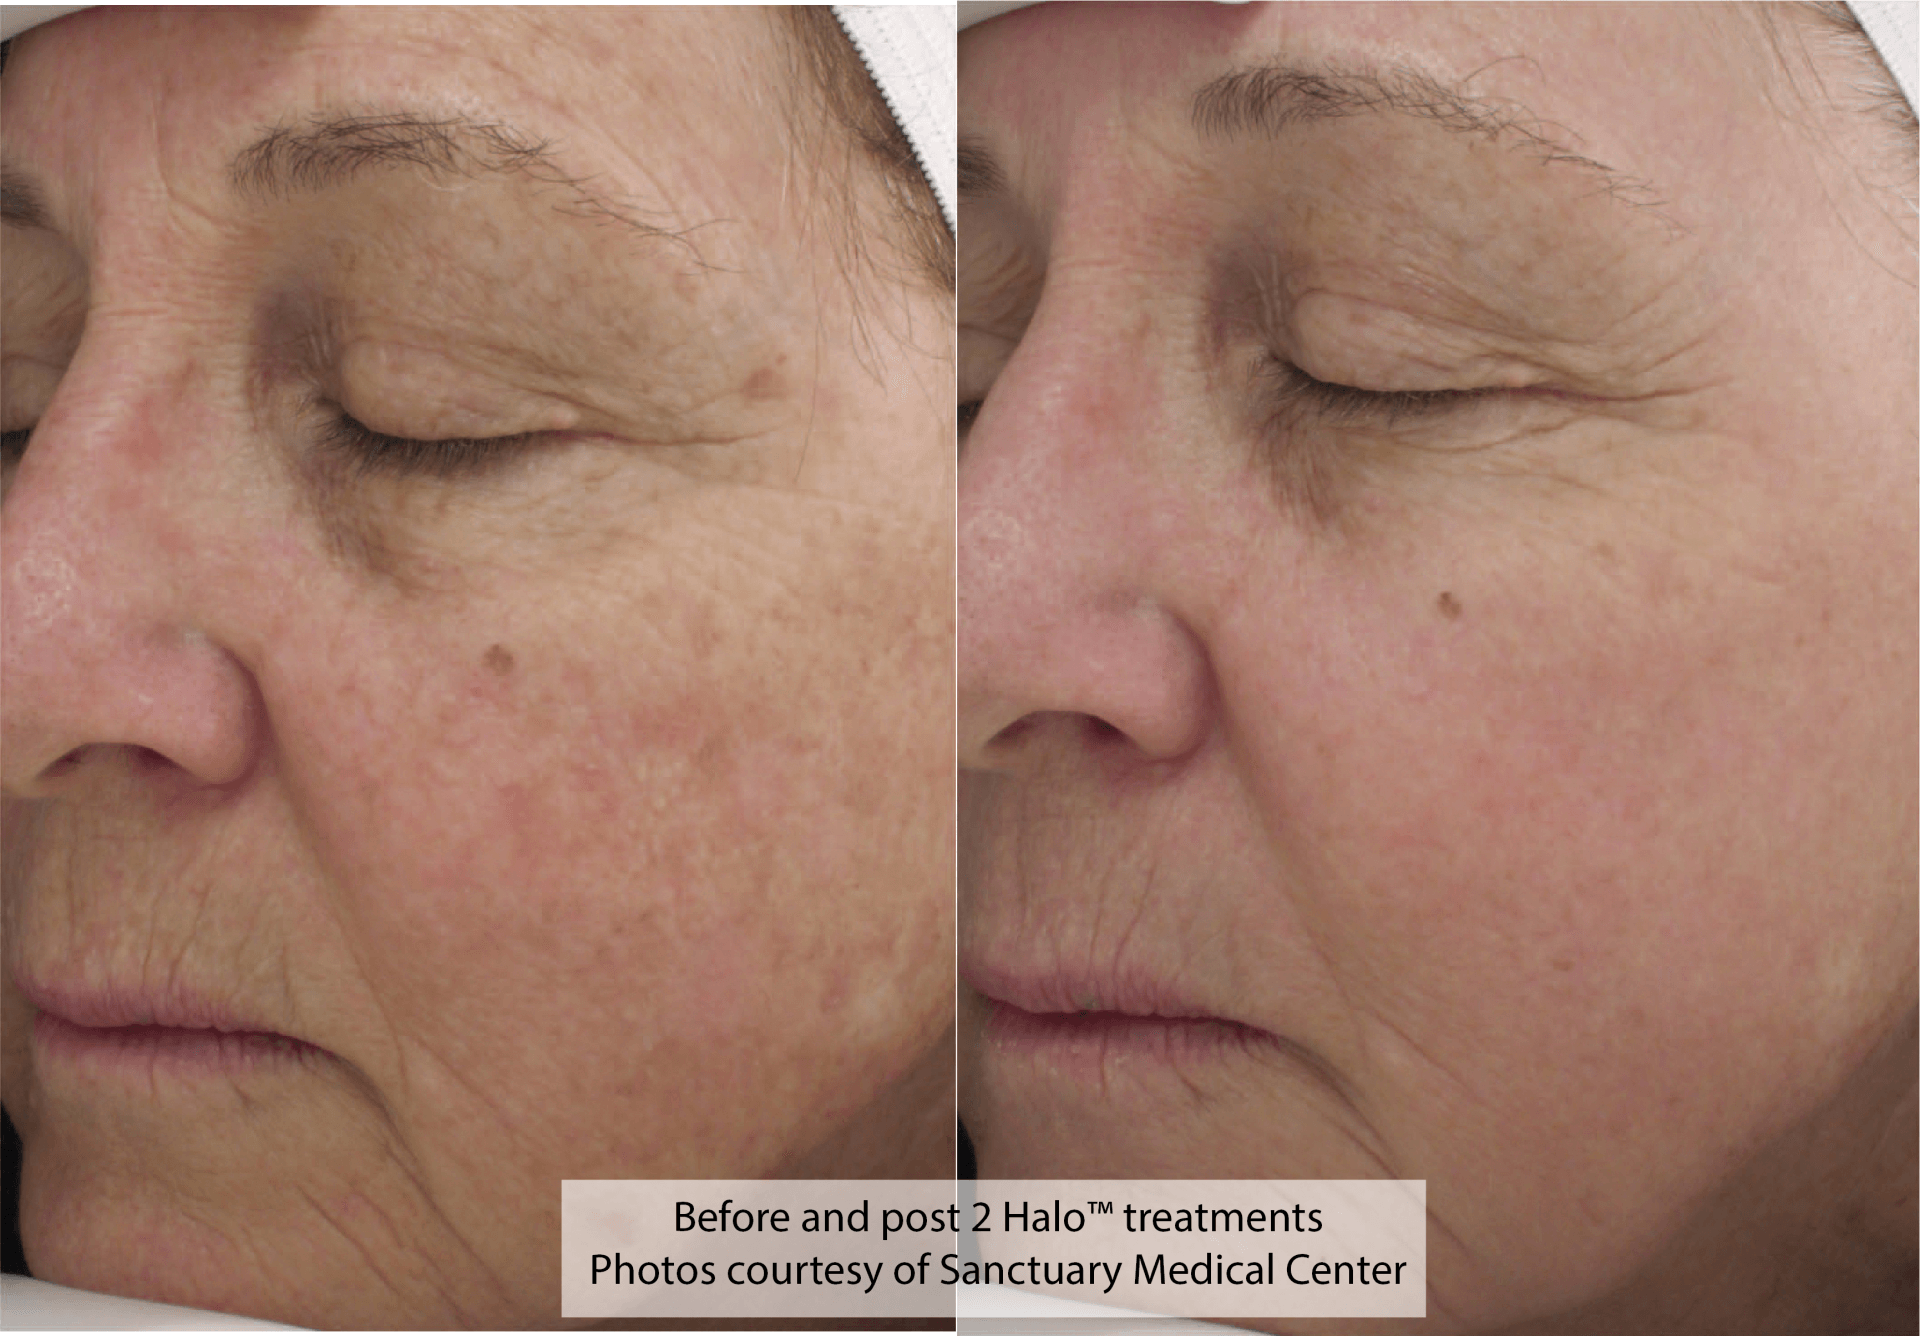 Halo Results- A before and after photo of a woman 's face.